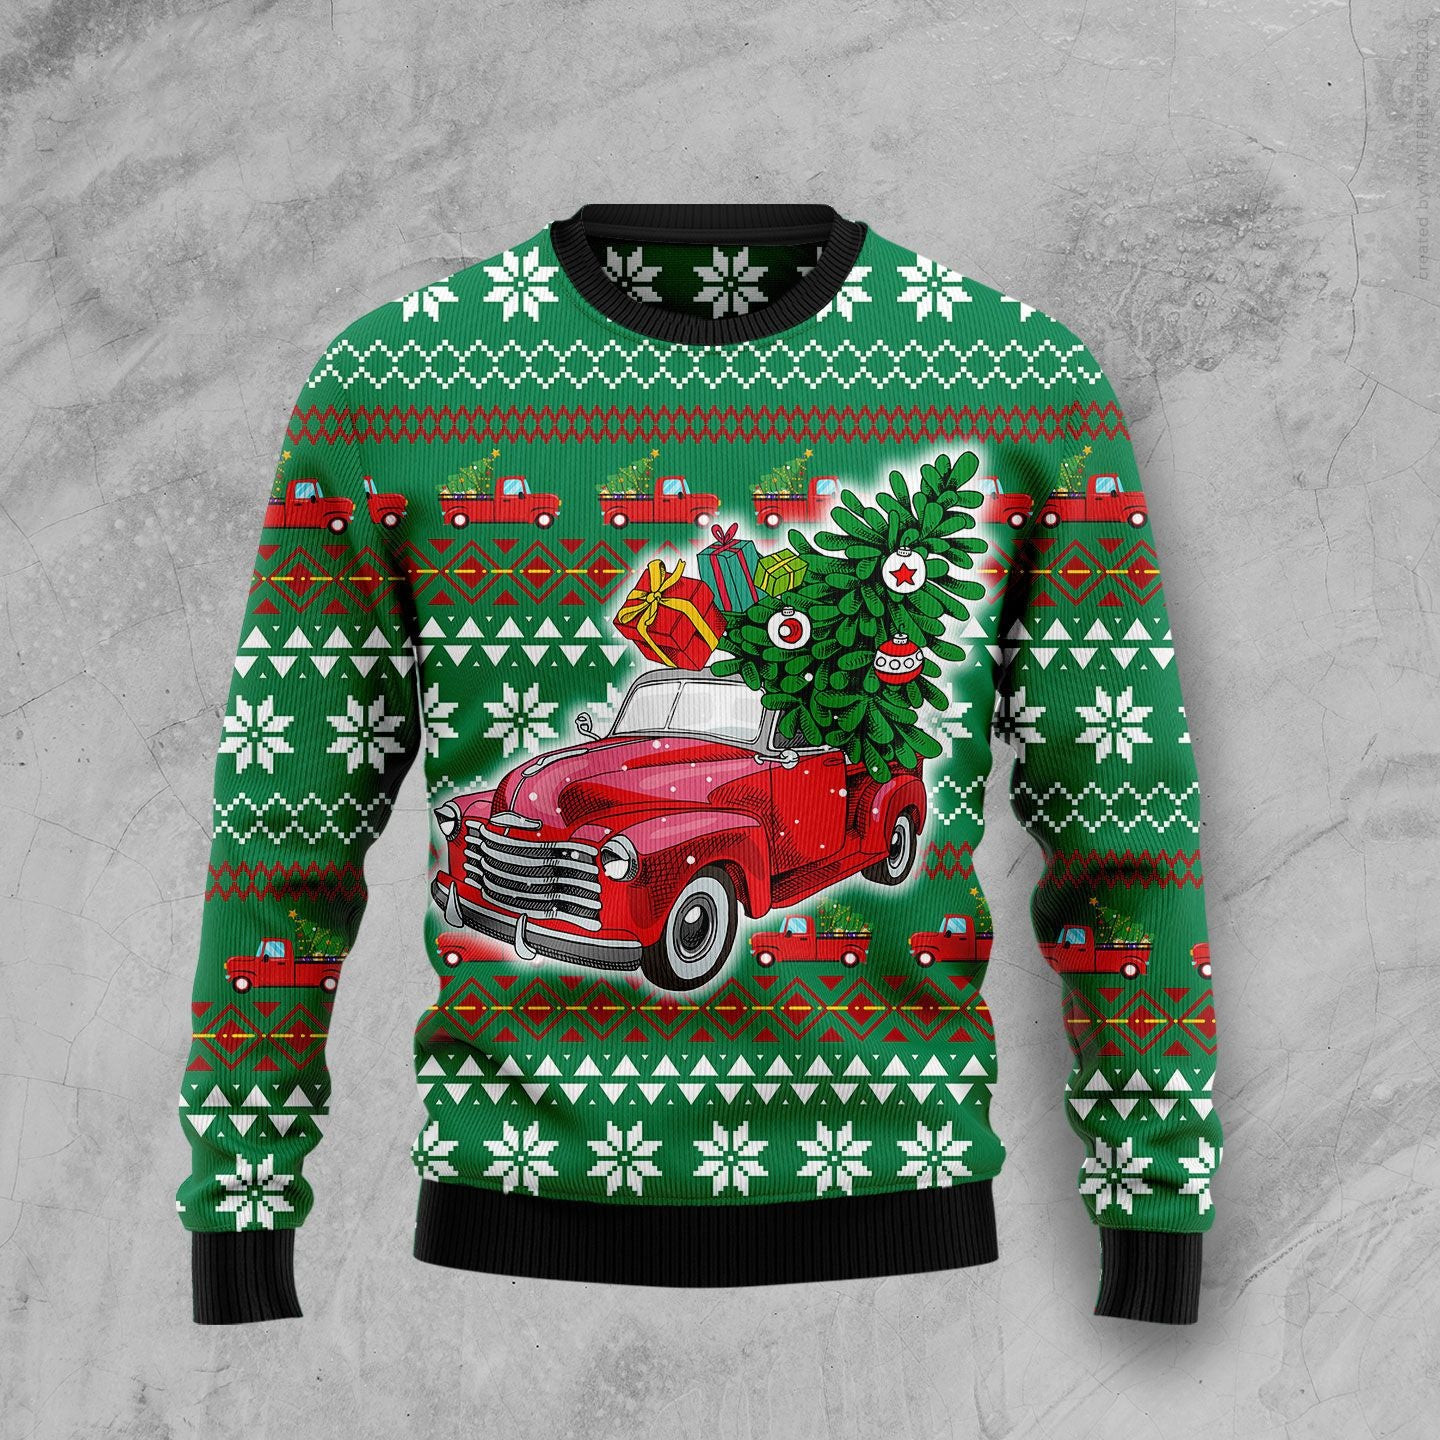 Pickup Truck Ugly Christmas Sweater, Ugly Sweater For Men Women, Holiday Sweater